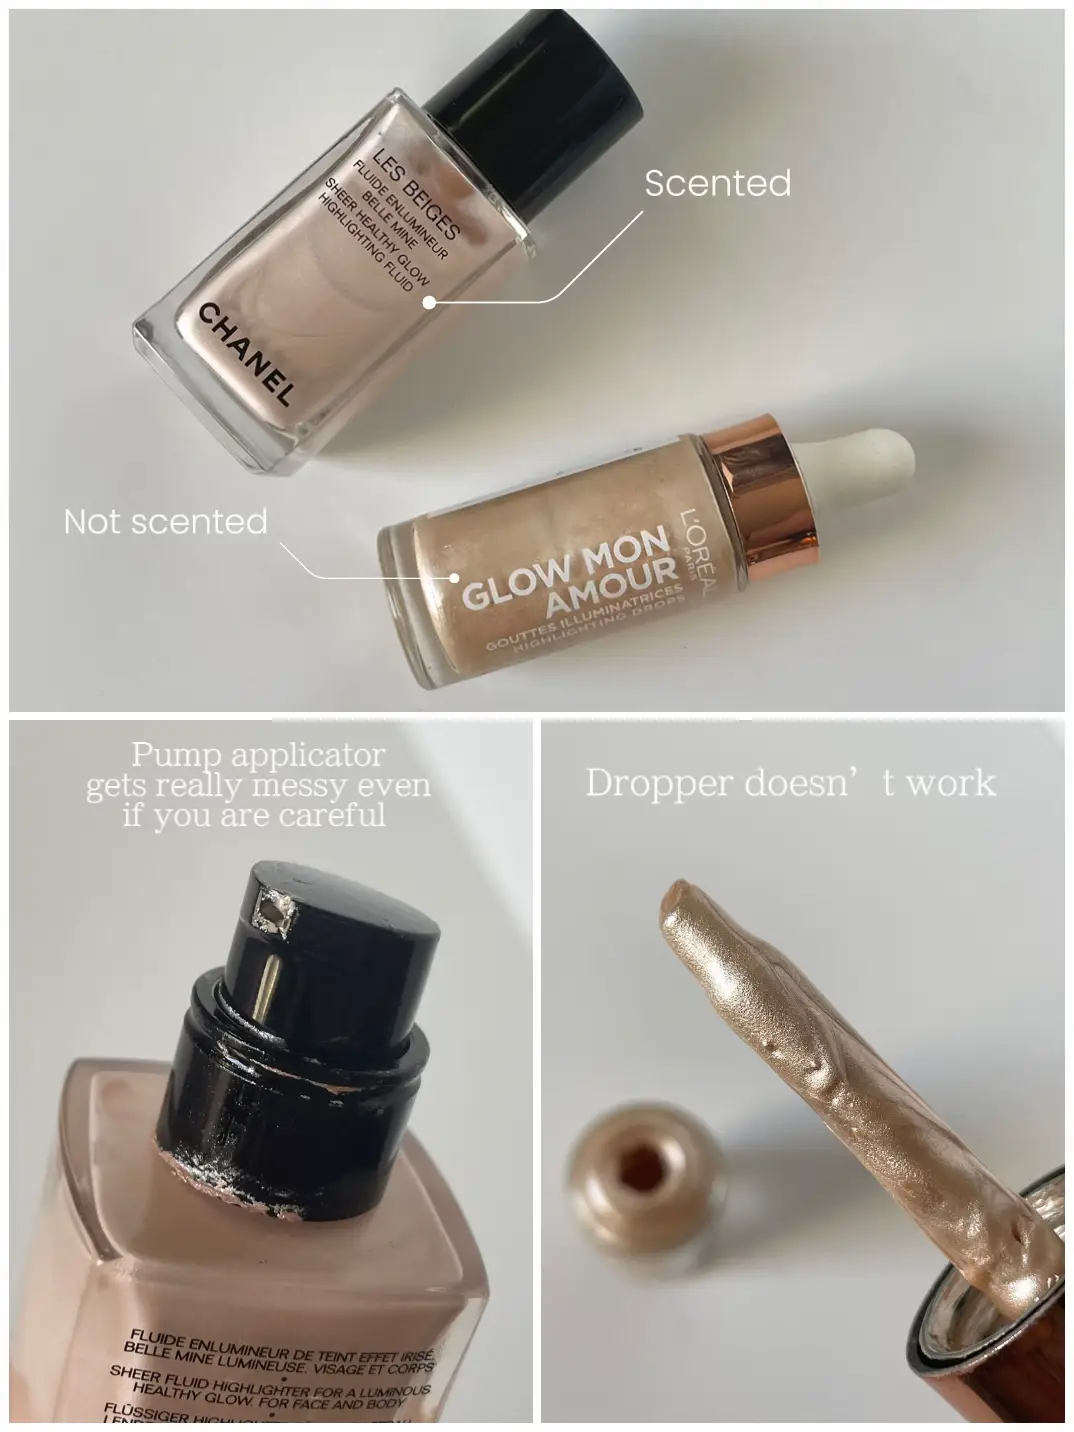 Chanel £44 vs L'Oréal £8 liquid highlighters, Gallery posted by Jovana